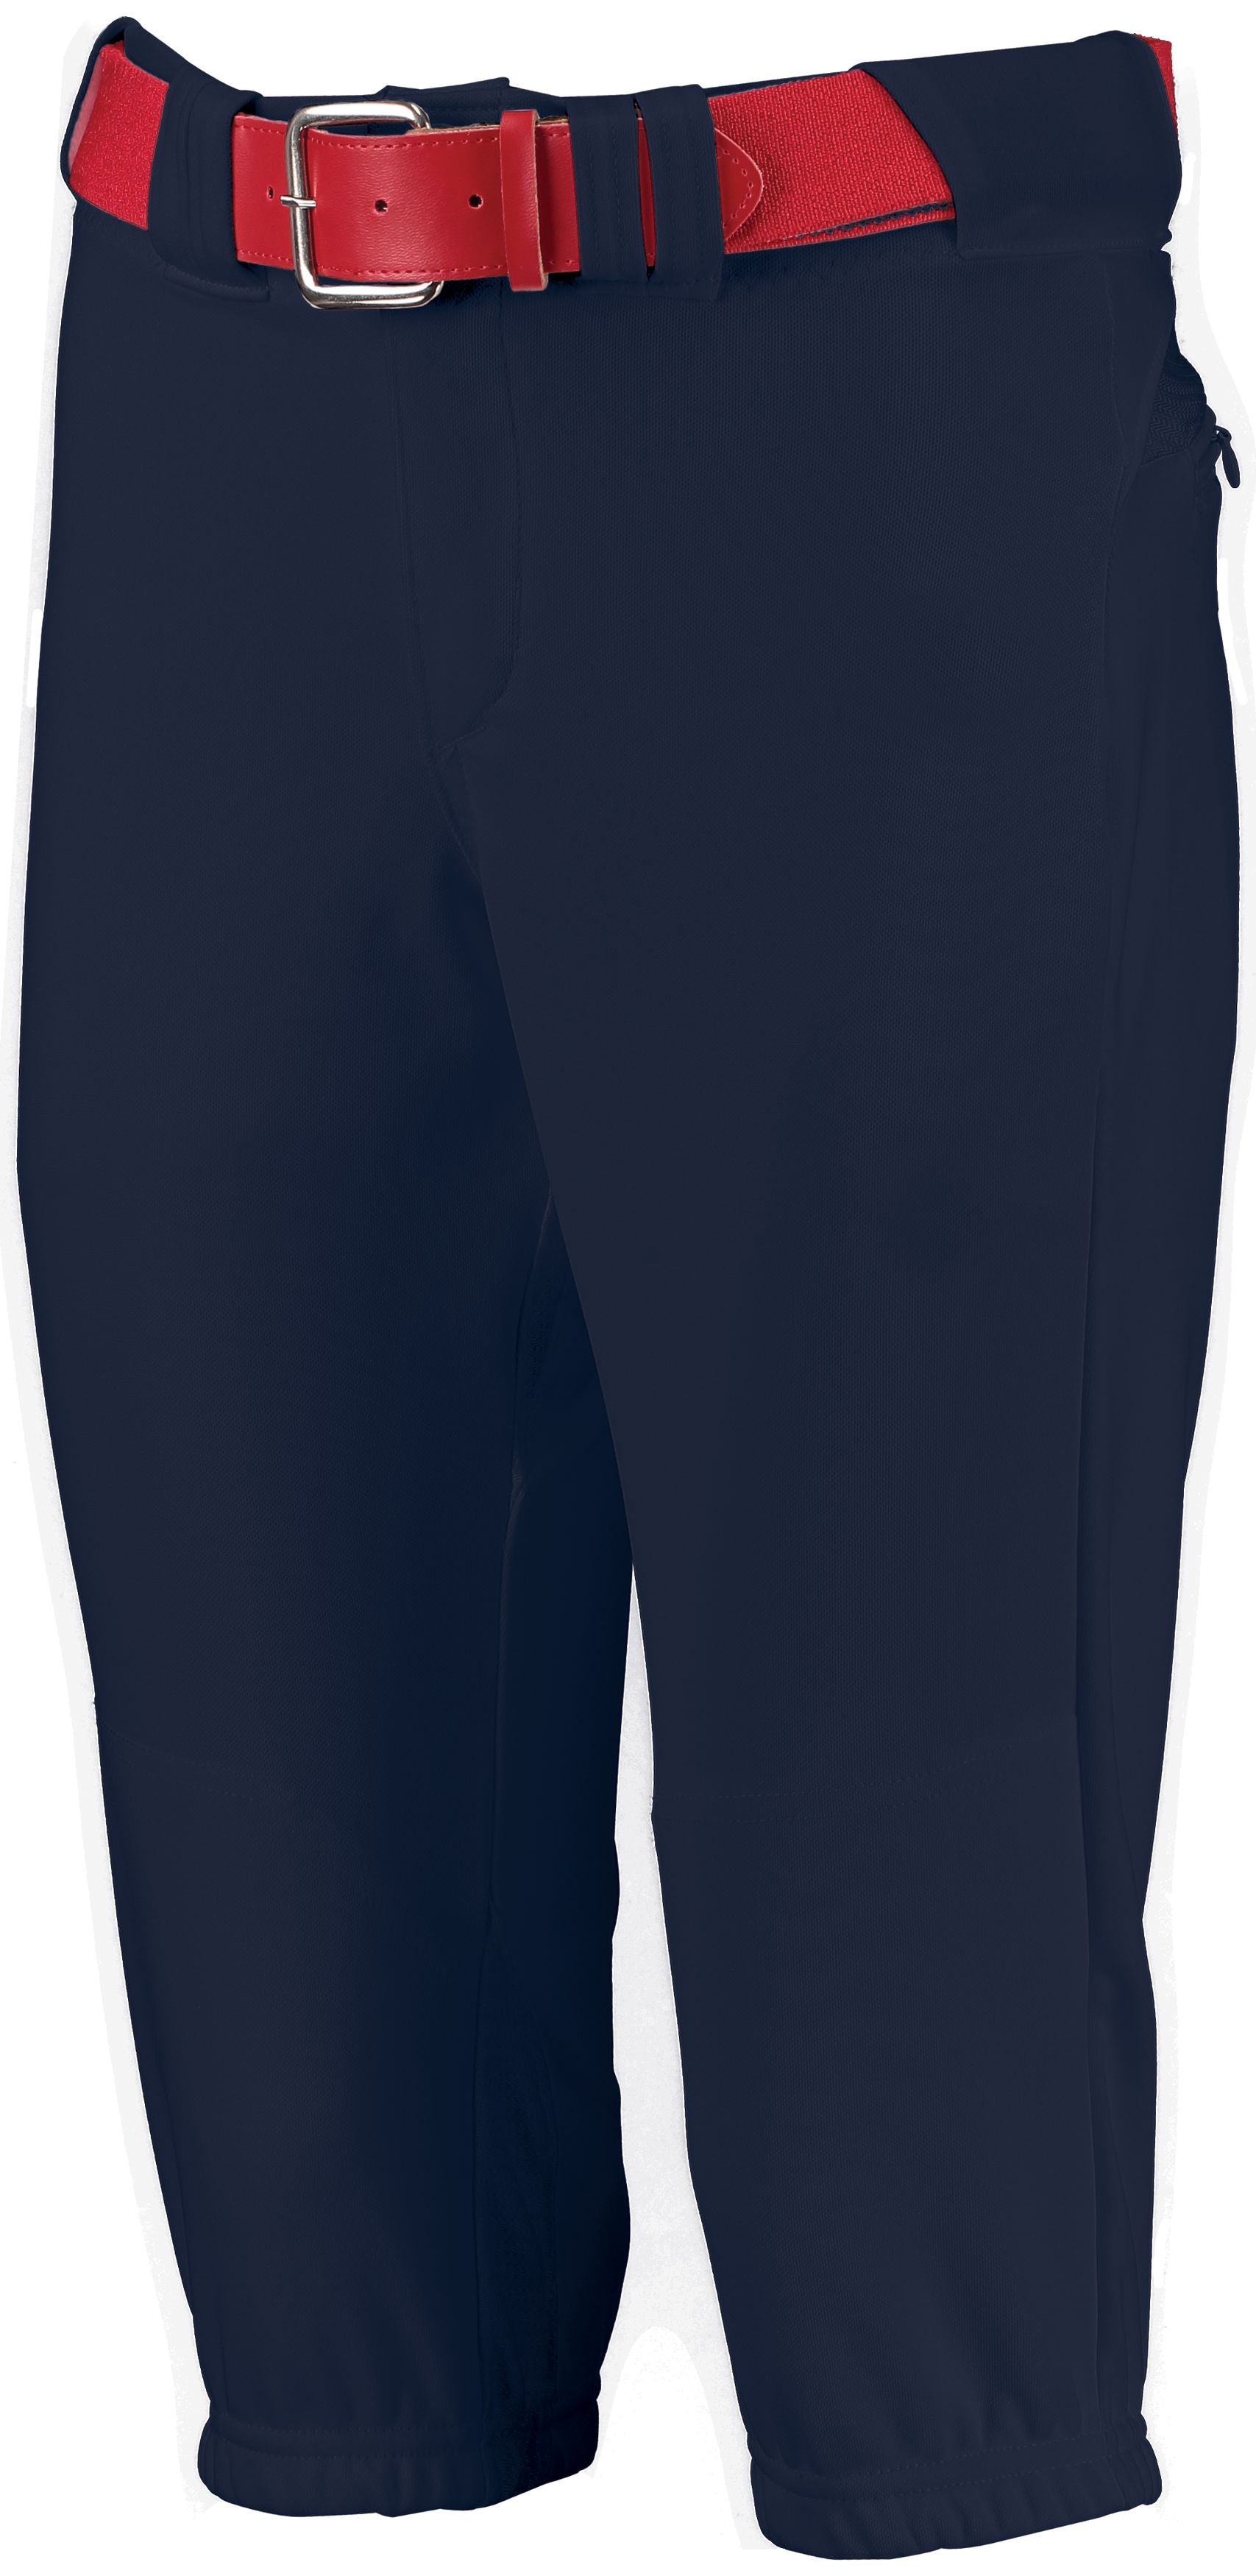 Russell Athletic Ladies Low Rise Diamond Fit Knicker in Navy  -Part of the Ladies, Softball, Russell-Athletic-Products product lines at KanaleyCreations.com